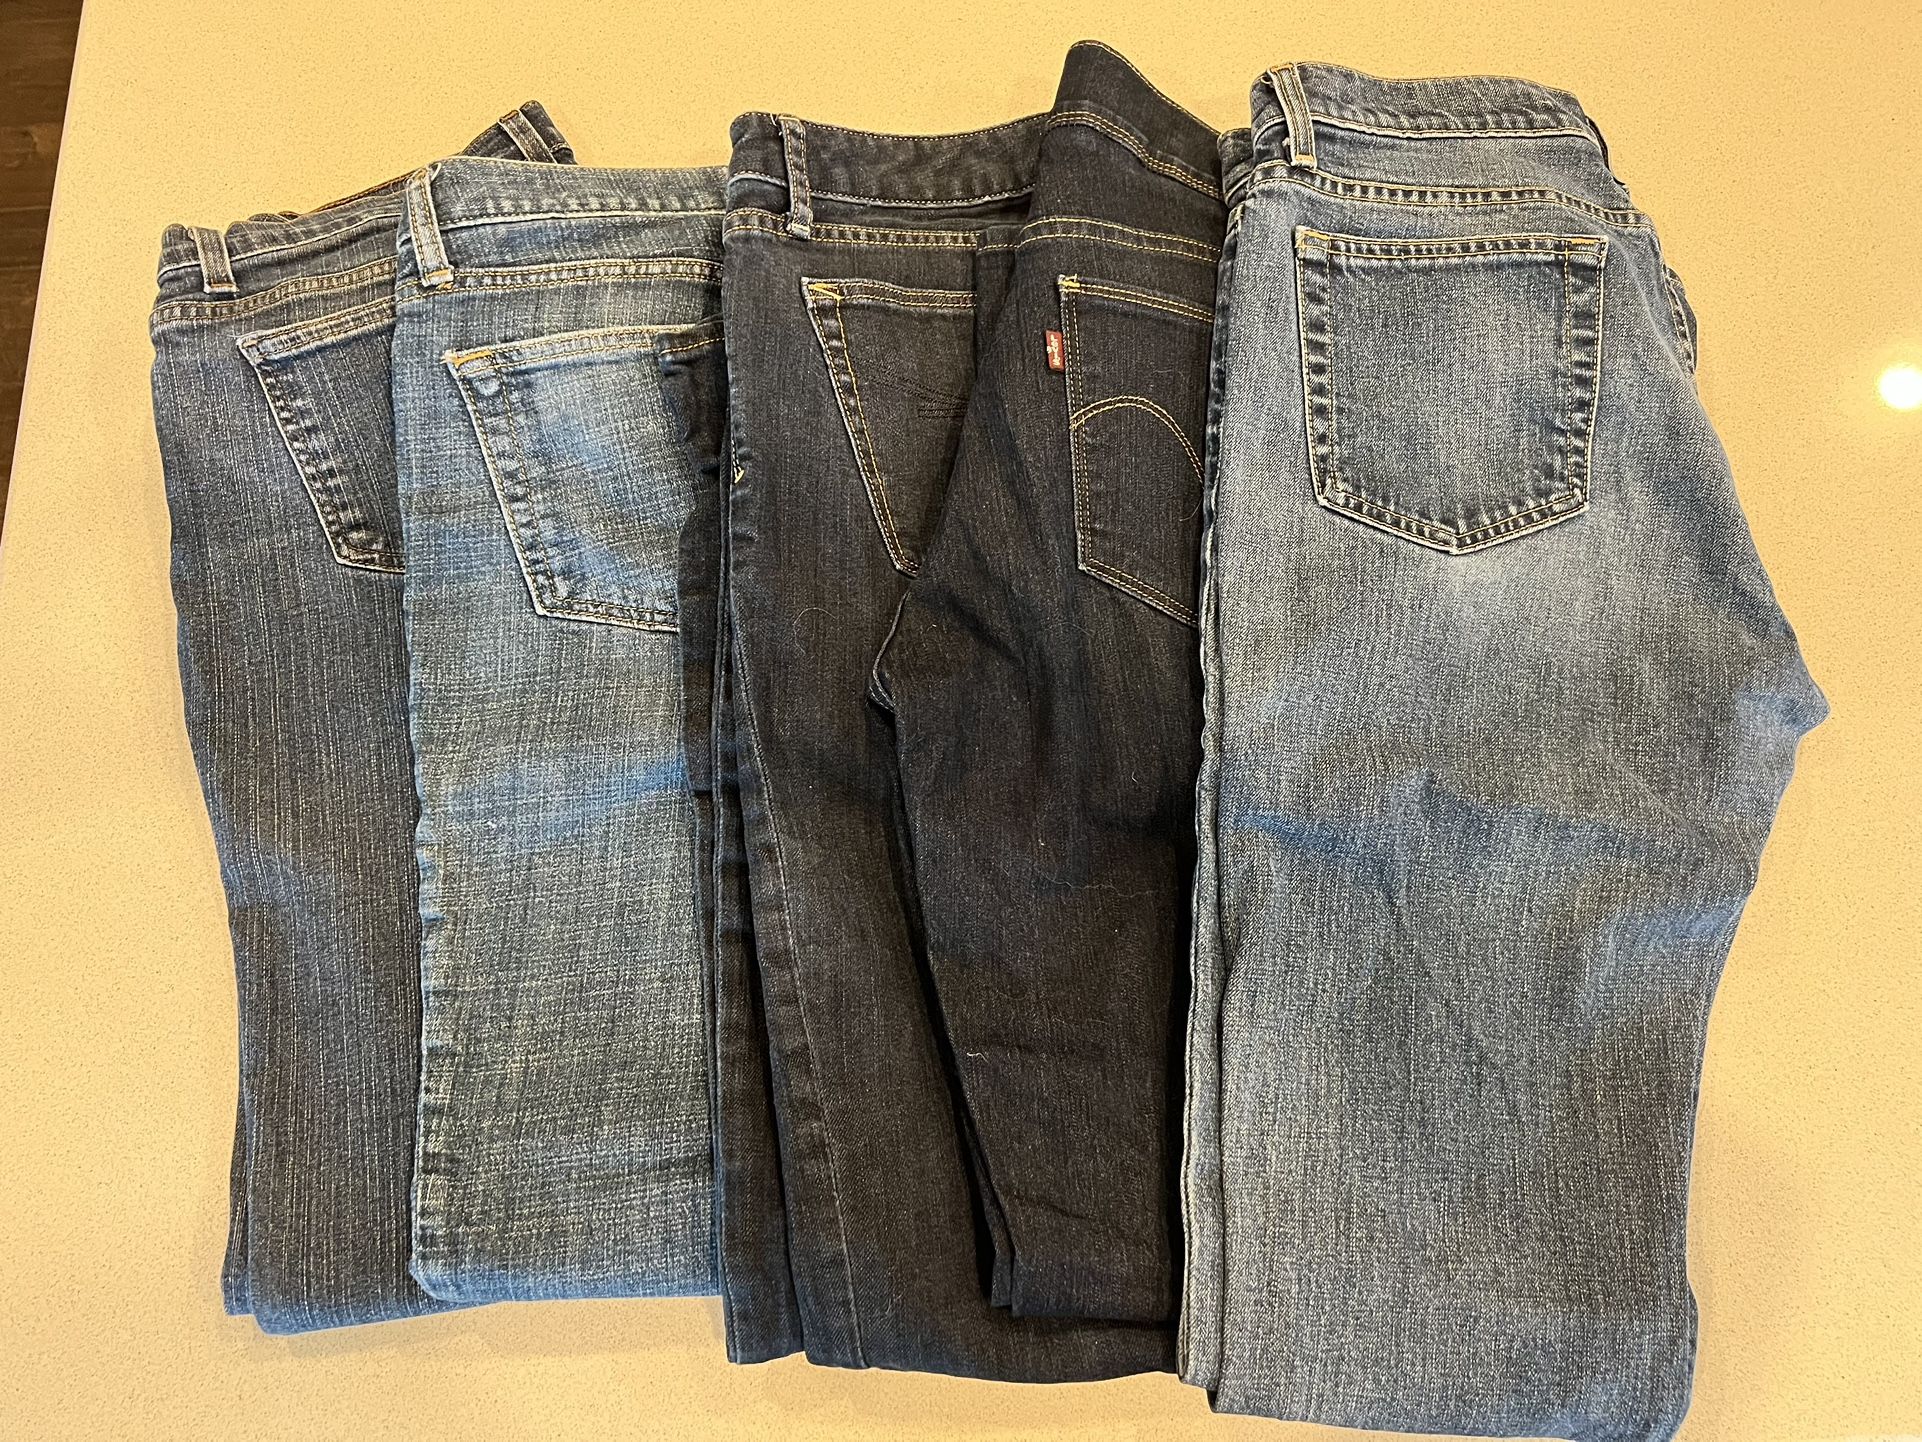 Women’s Jeans Lot Fit Like Size 6-8 Long And Various Tops Including Lularoe